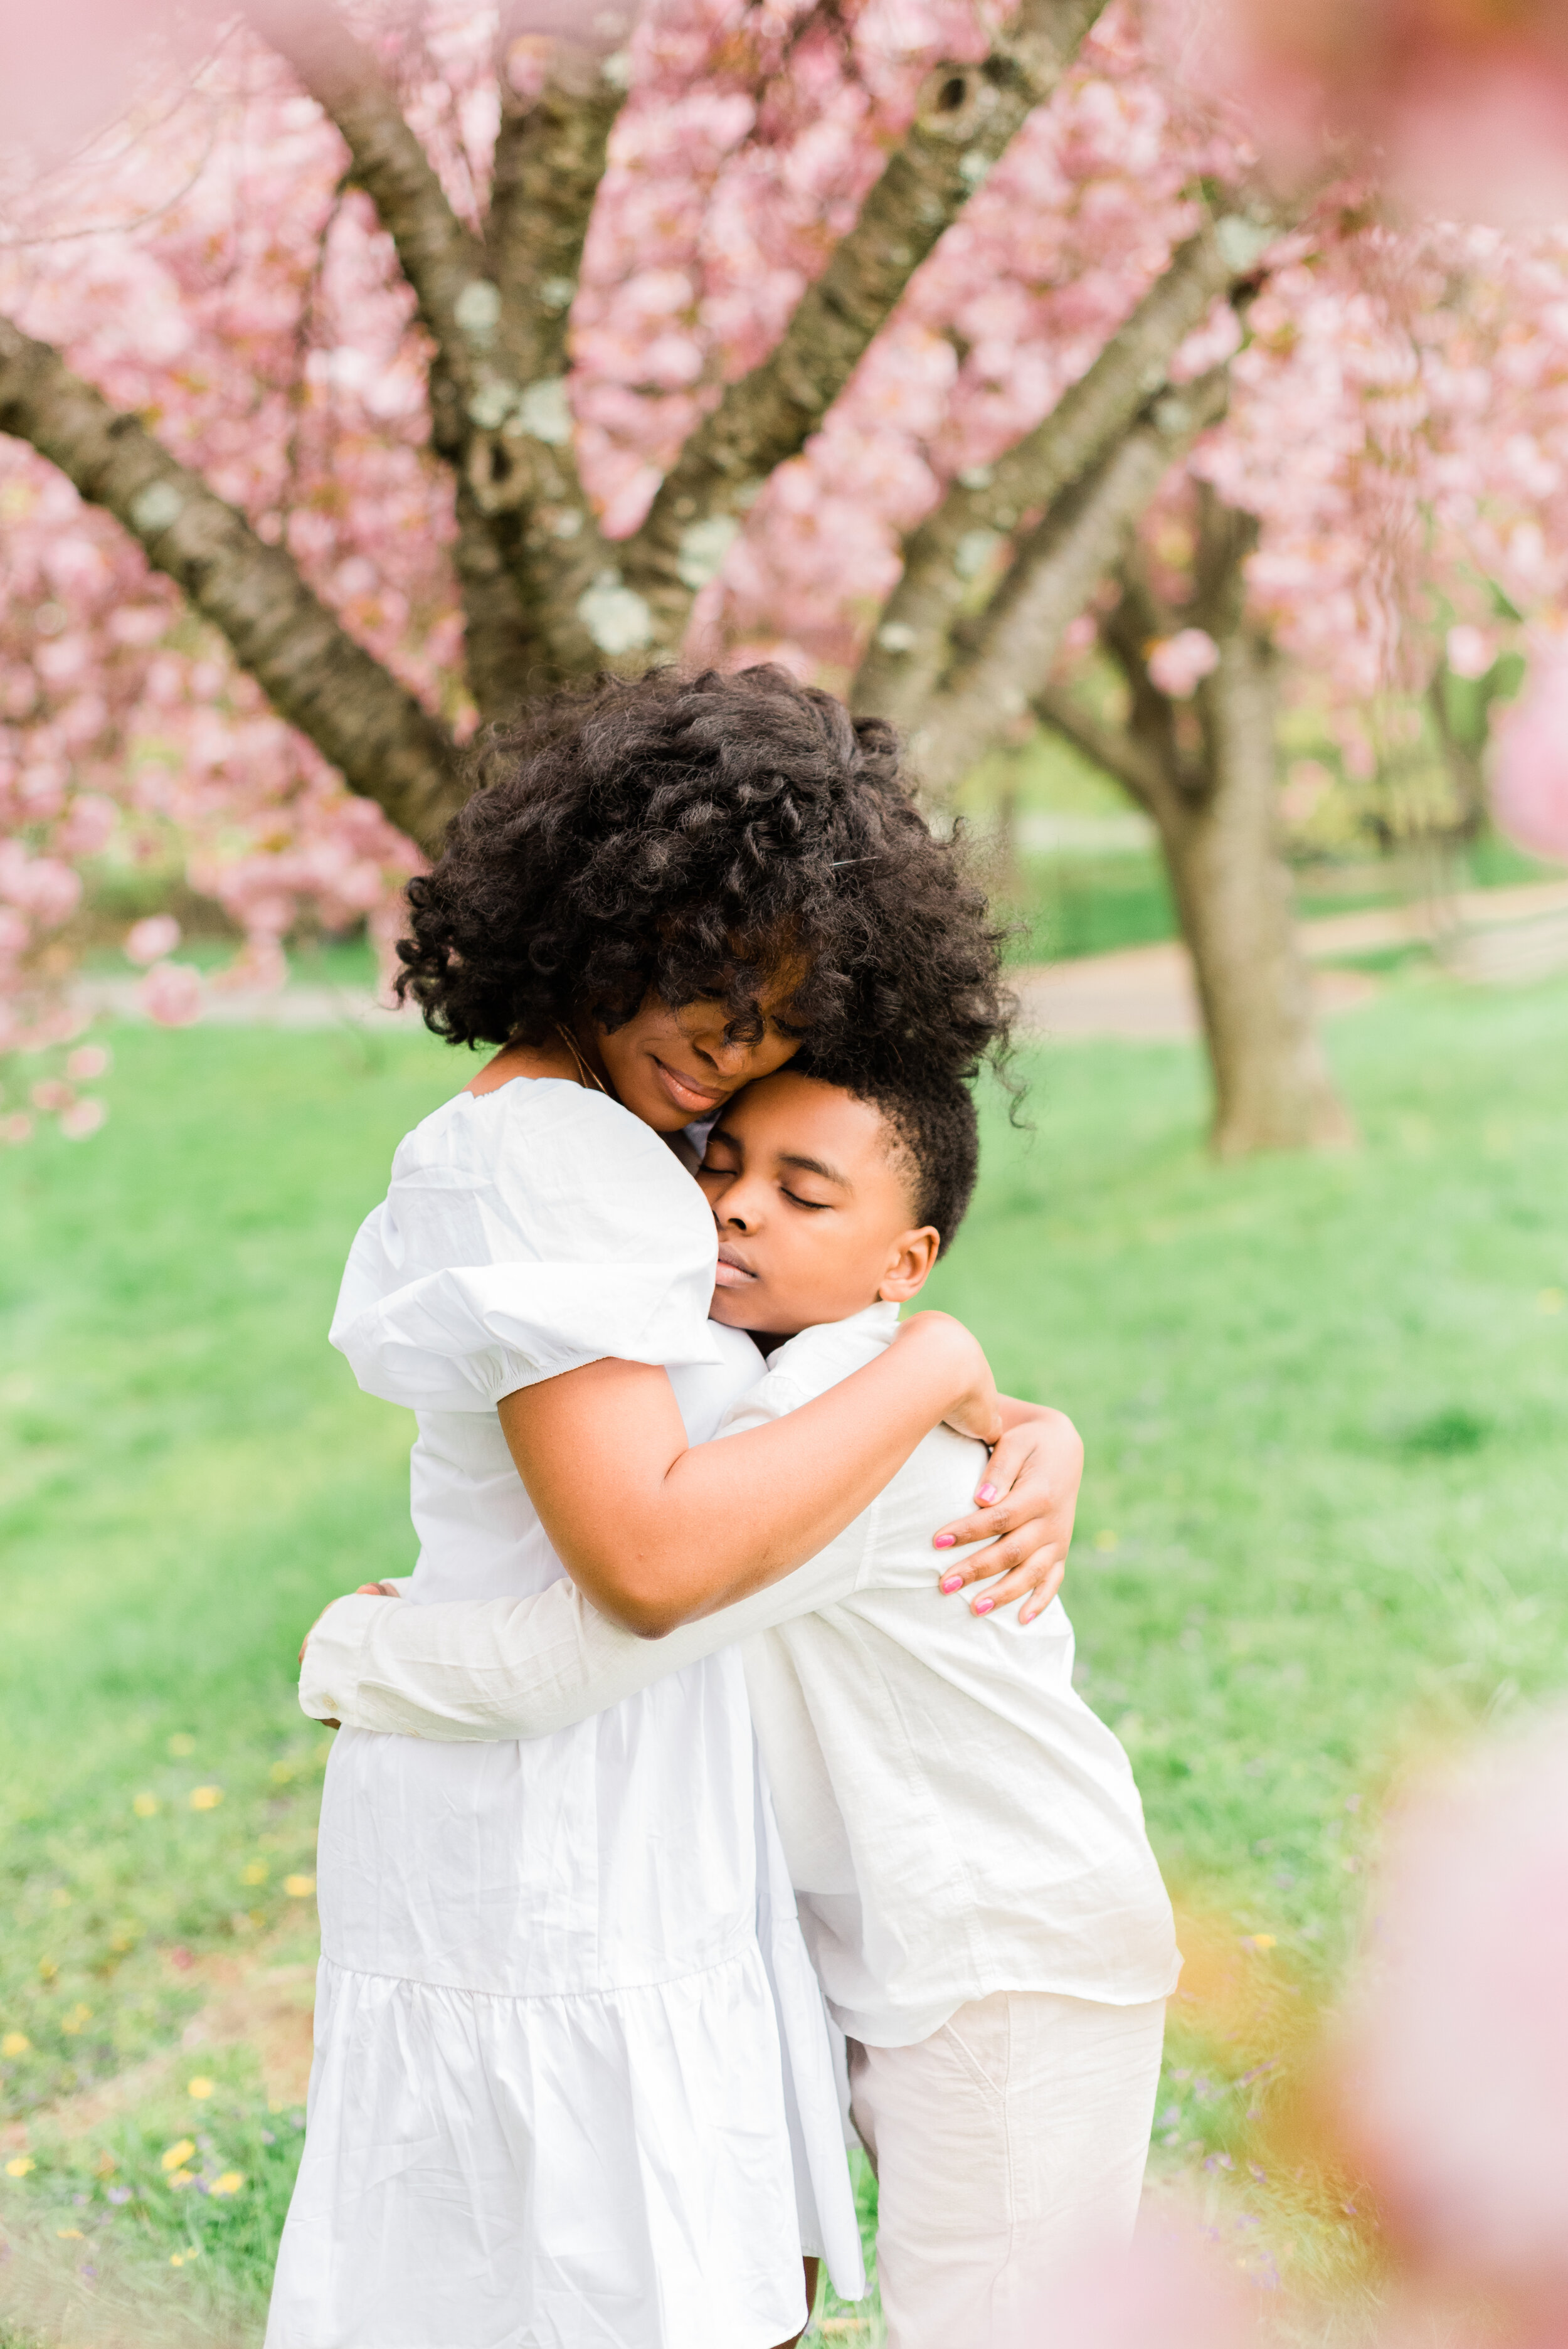  The love of this brother and sister is captured in the tender photo taken by photographer, Jacquie Erickson. Siblings love white outfits blurred background #jacquieericksonphotography #brotherandsisterphoto #tenderpicture 